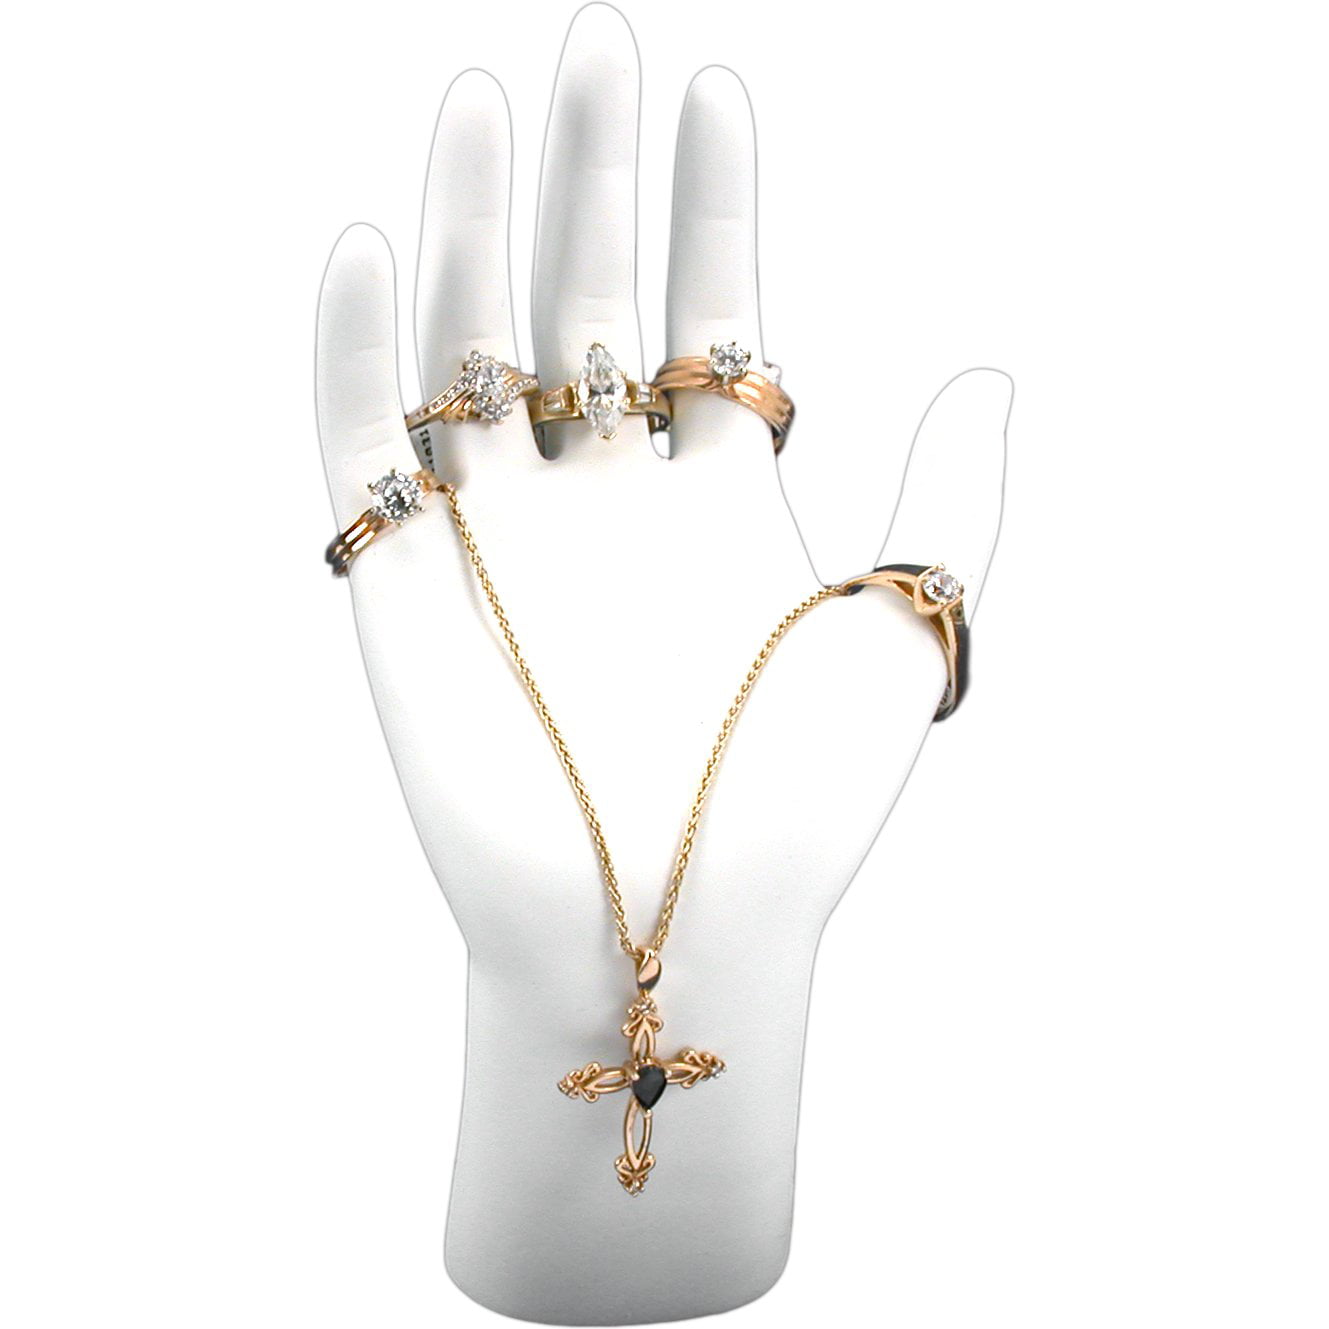 Details about   Jewelry Ring Bracelet Necklace Glove Resin Hand Display Holder Stand Rack